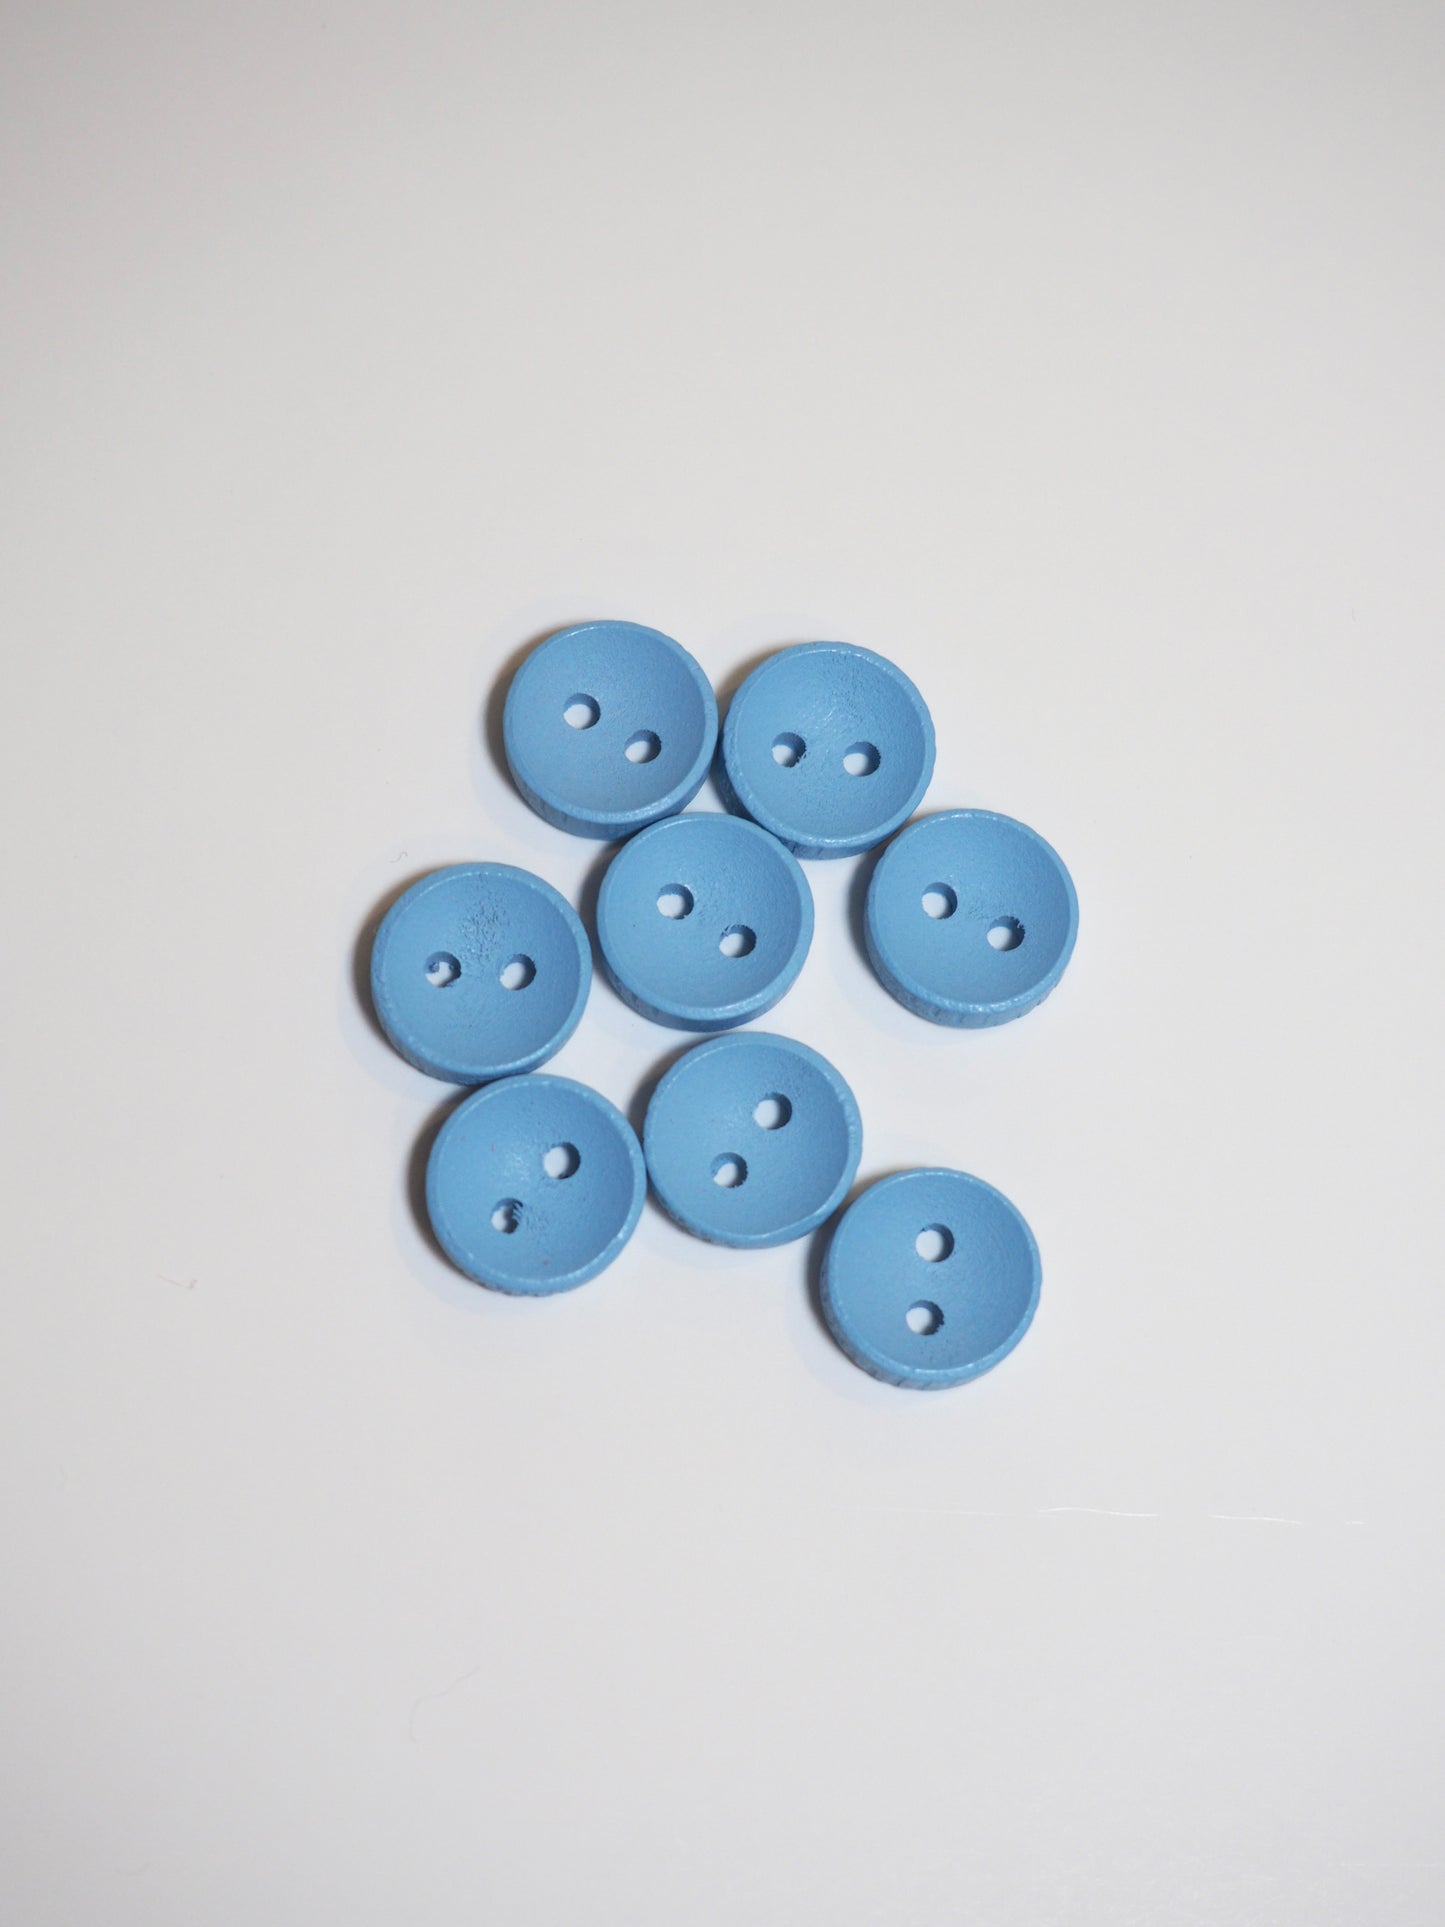 Cute Wood Buttons (10mm)